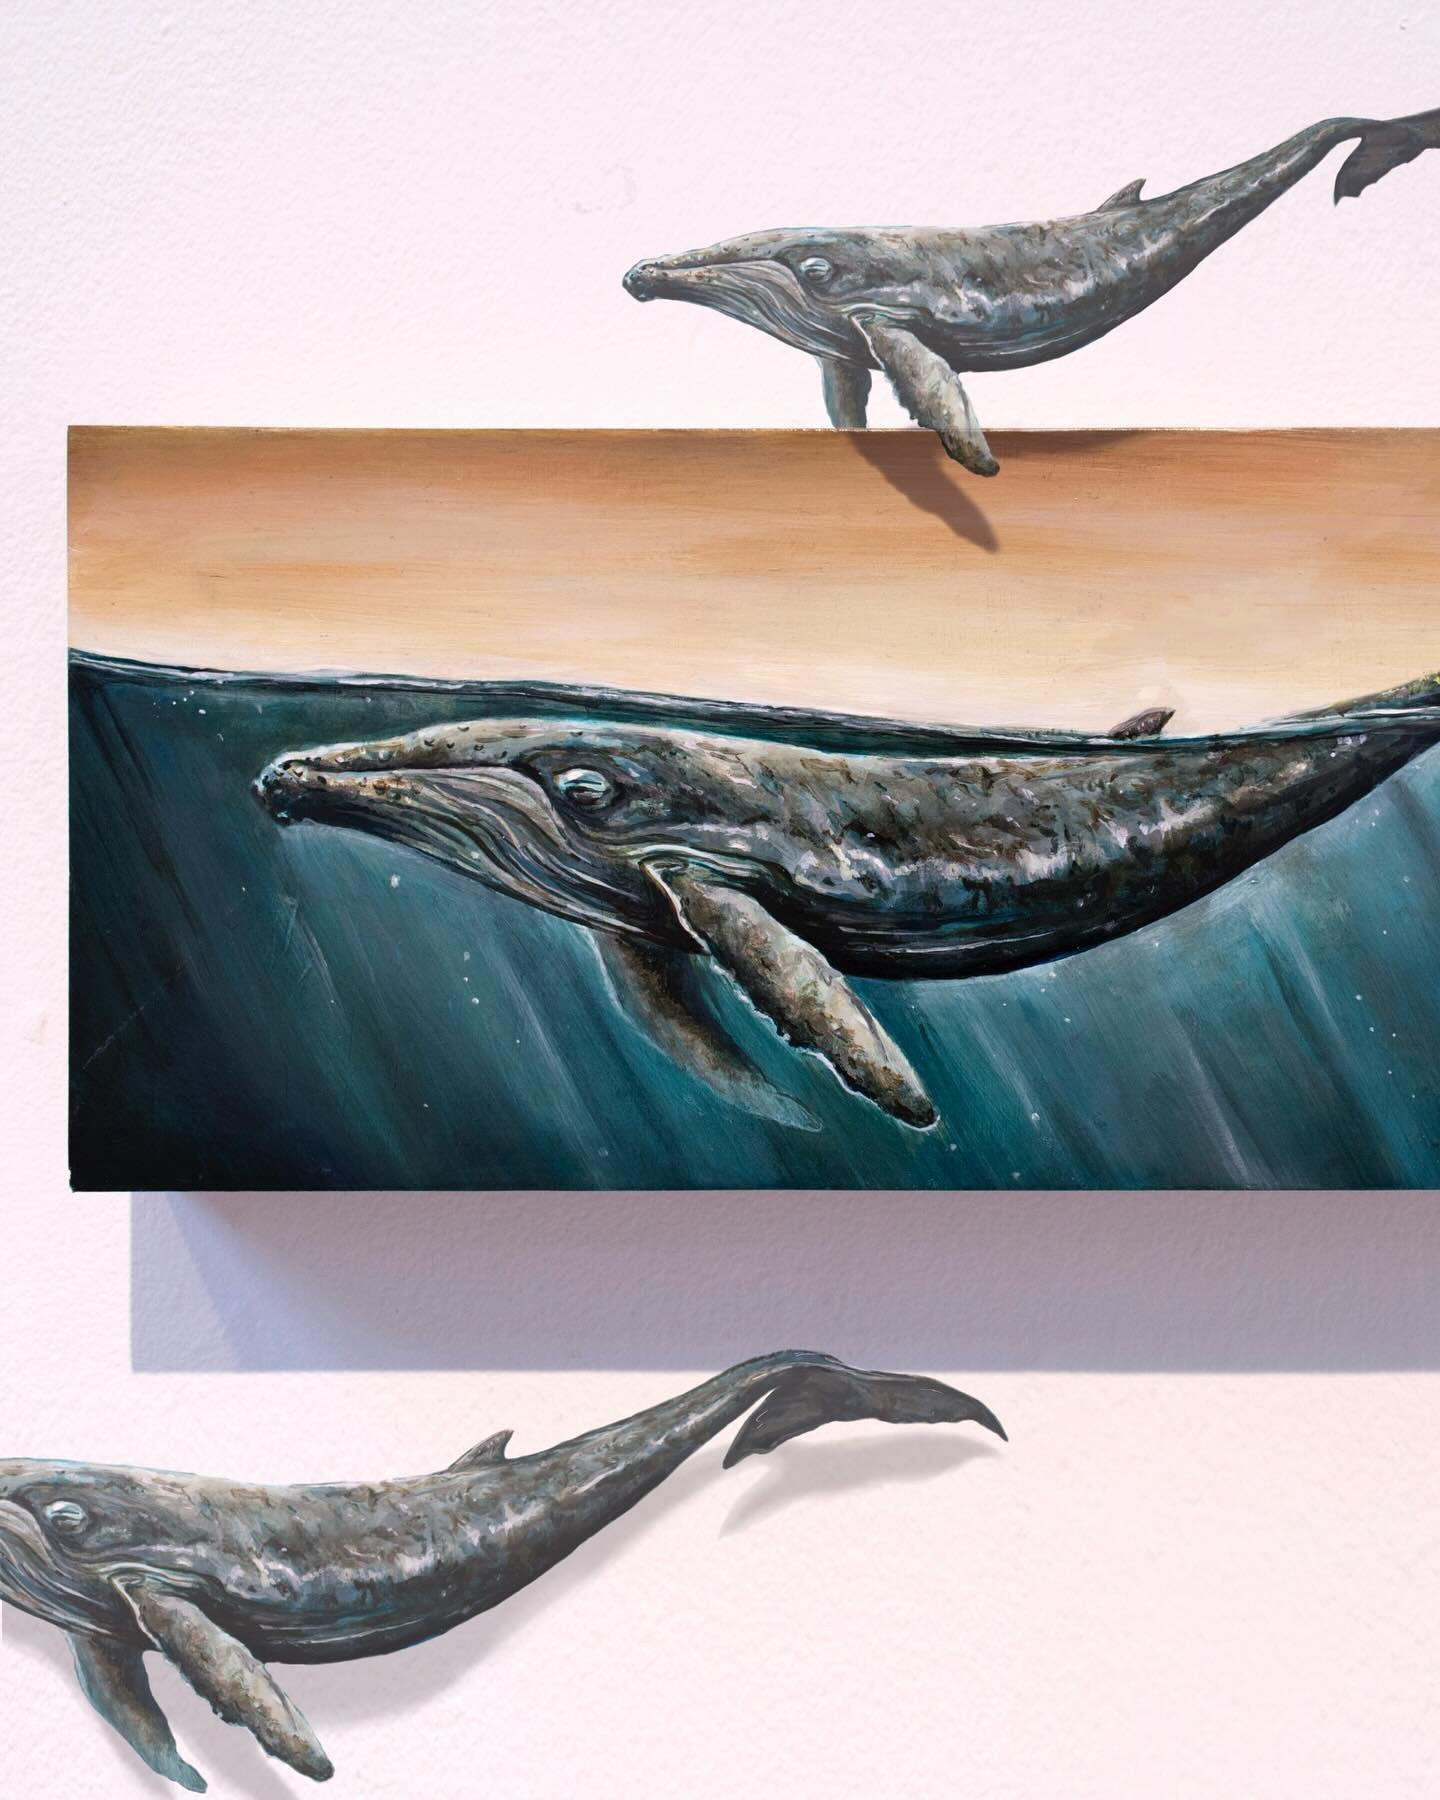 &ldquo;Whale, Whale, Whale&hellip; What Do We Have Here?&rdquo;

I&rsquo;ve been playing around with 
digitally altering photos of paintings
and seeing what happens 

as art transforms 

as we transform

from one medium 
to another

Also, who doesn&r